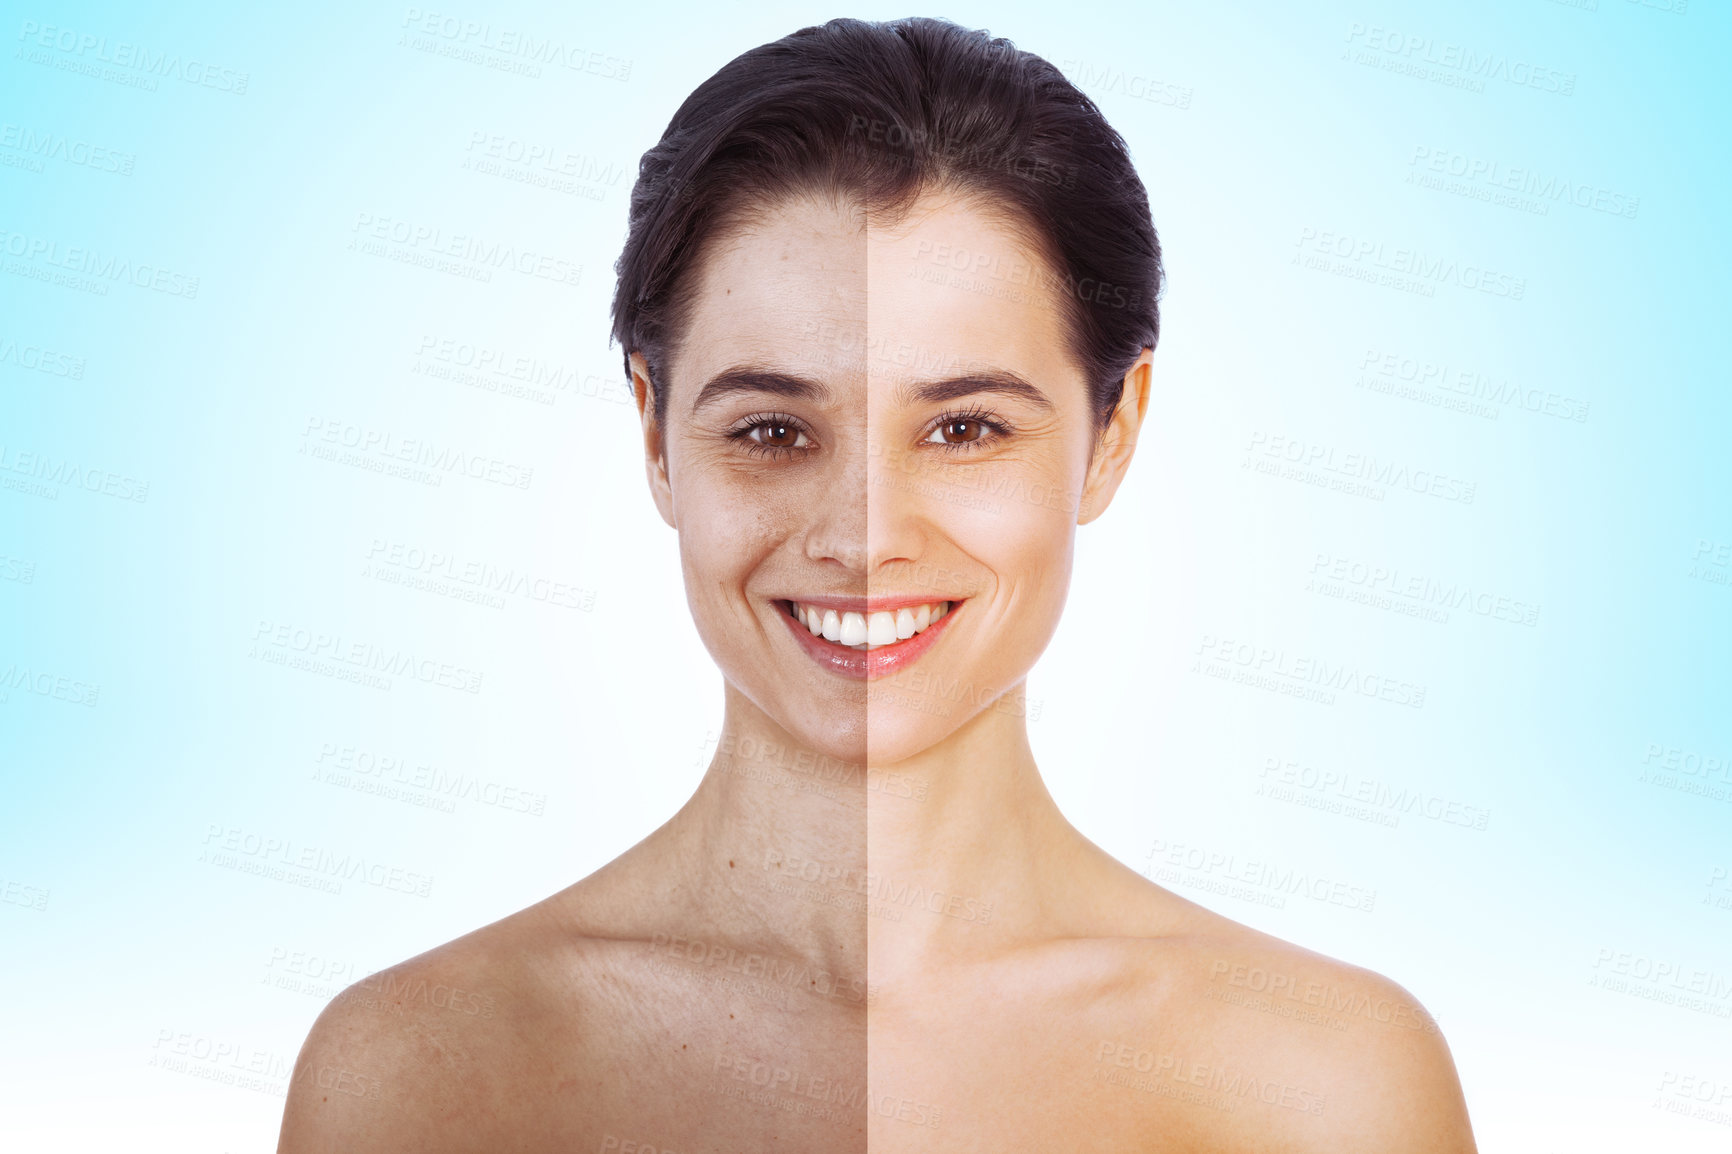 Buy stock photo Before and after portrait of an attractive young woman - Cross-section